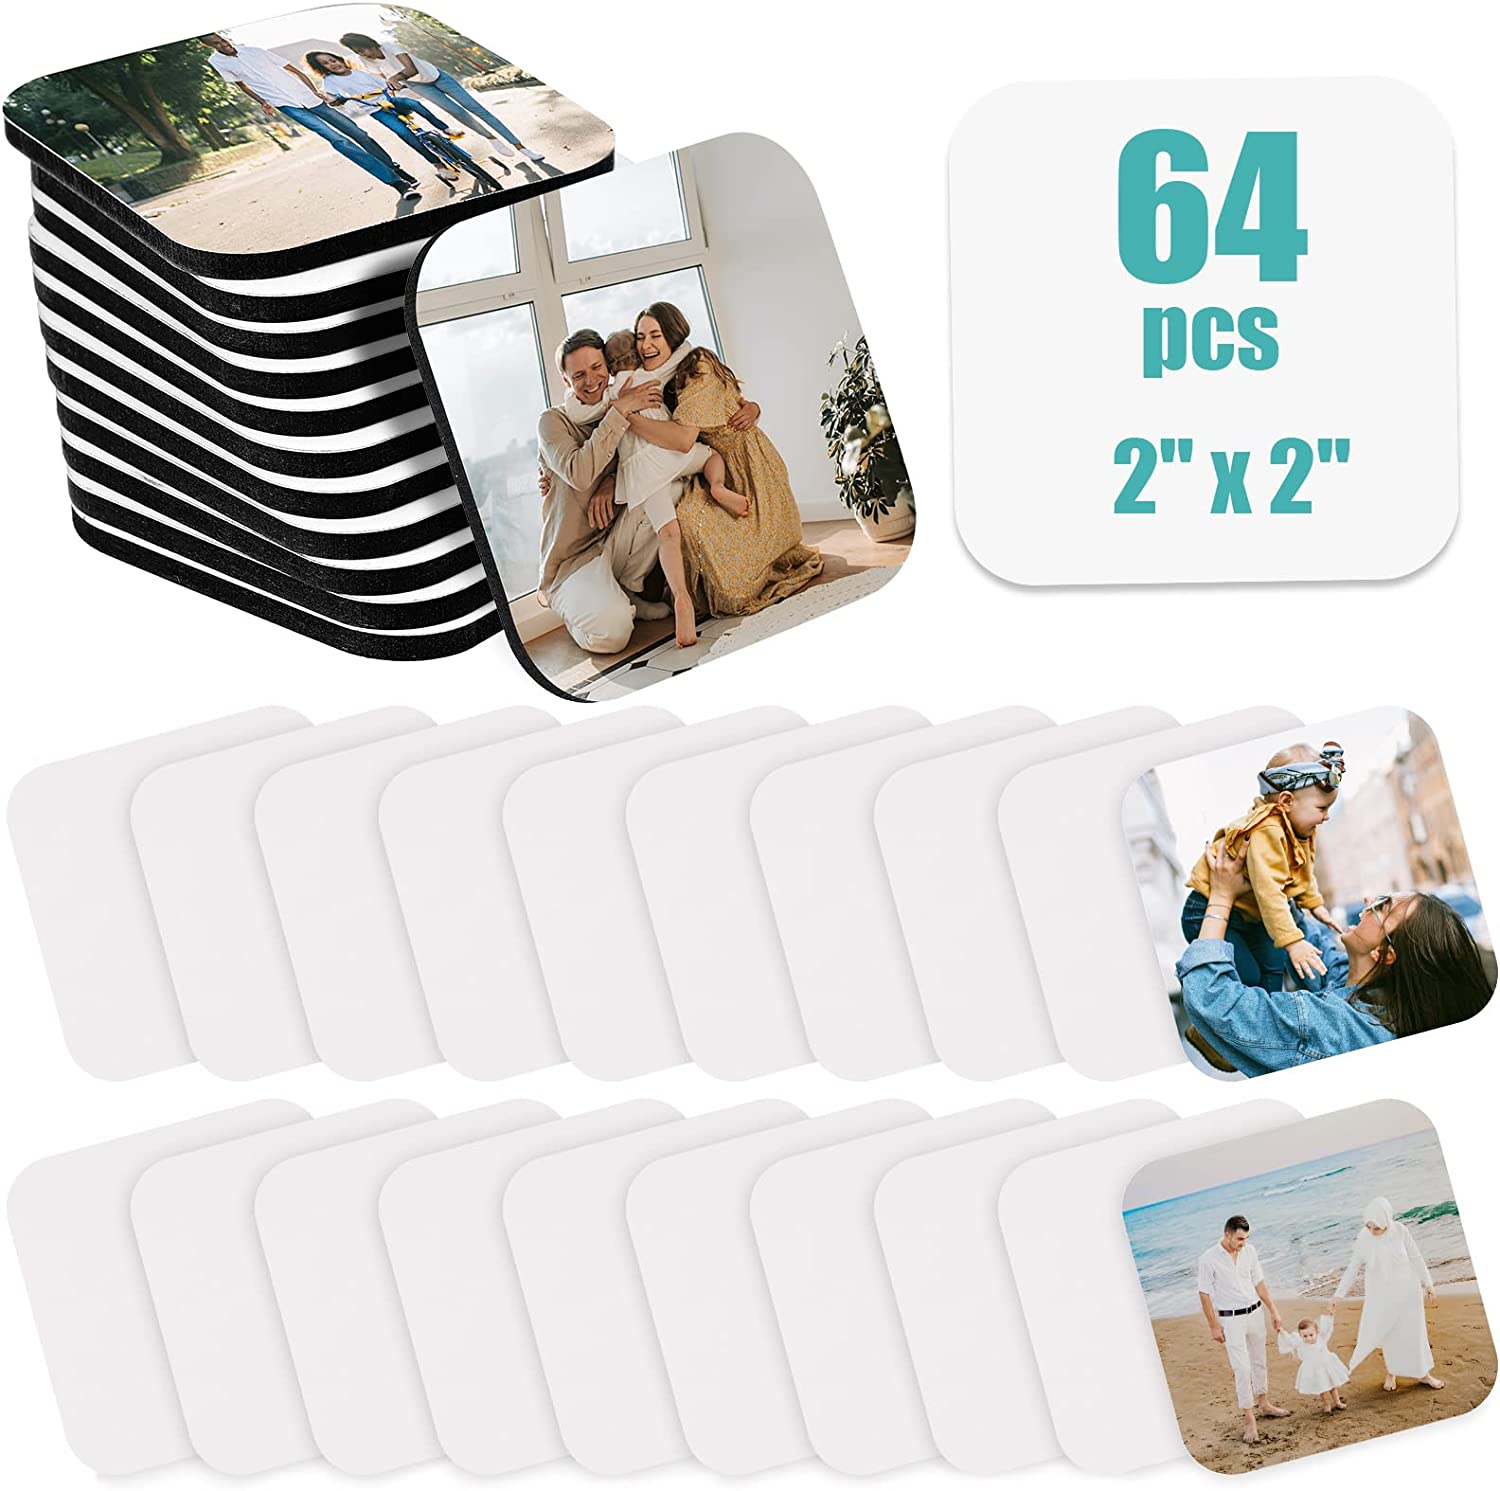 Sublimation Blank Fridge Magnets for Home Kitchen Refrigerator Microwave  Oven Wall Door Decoration or Office Calendar with 30 Pcs Sublimation  Printing